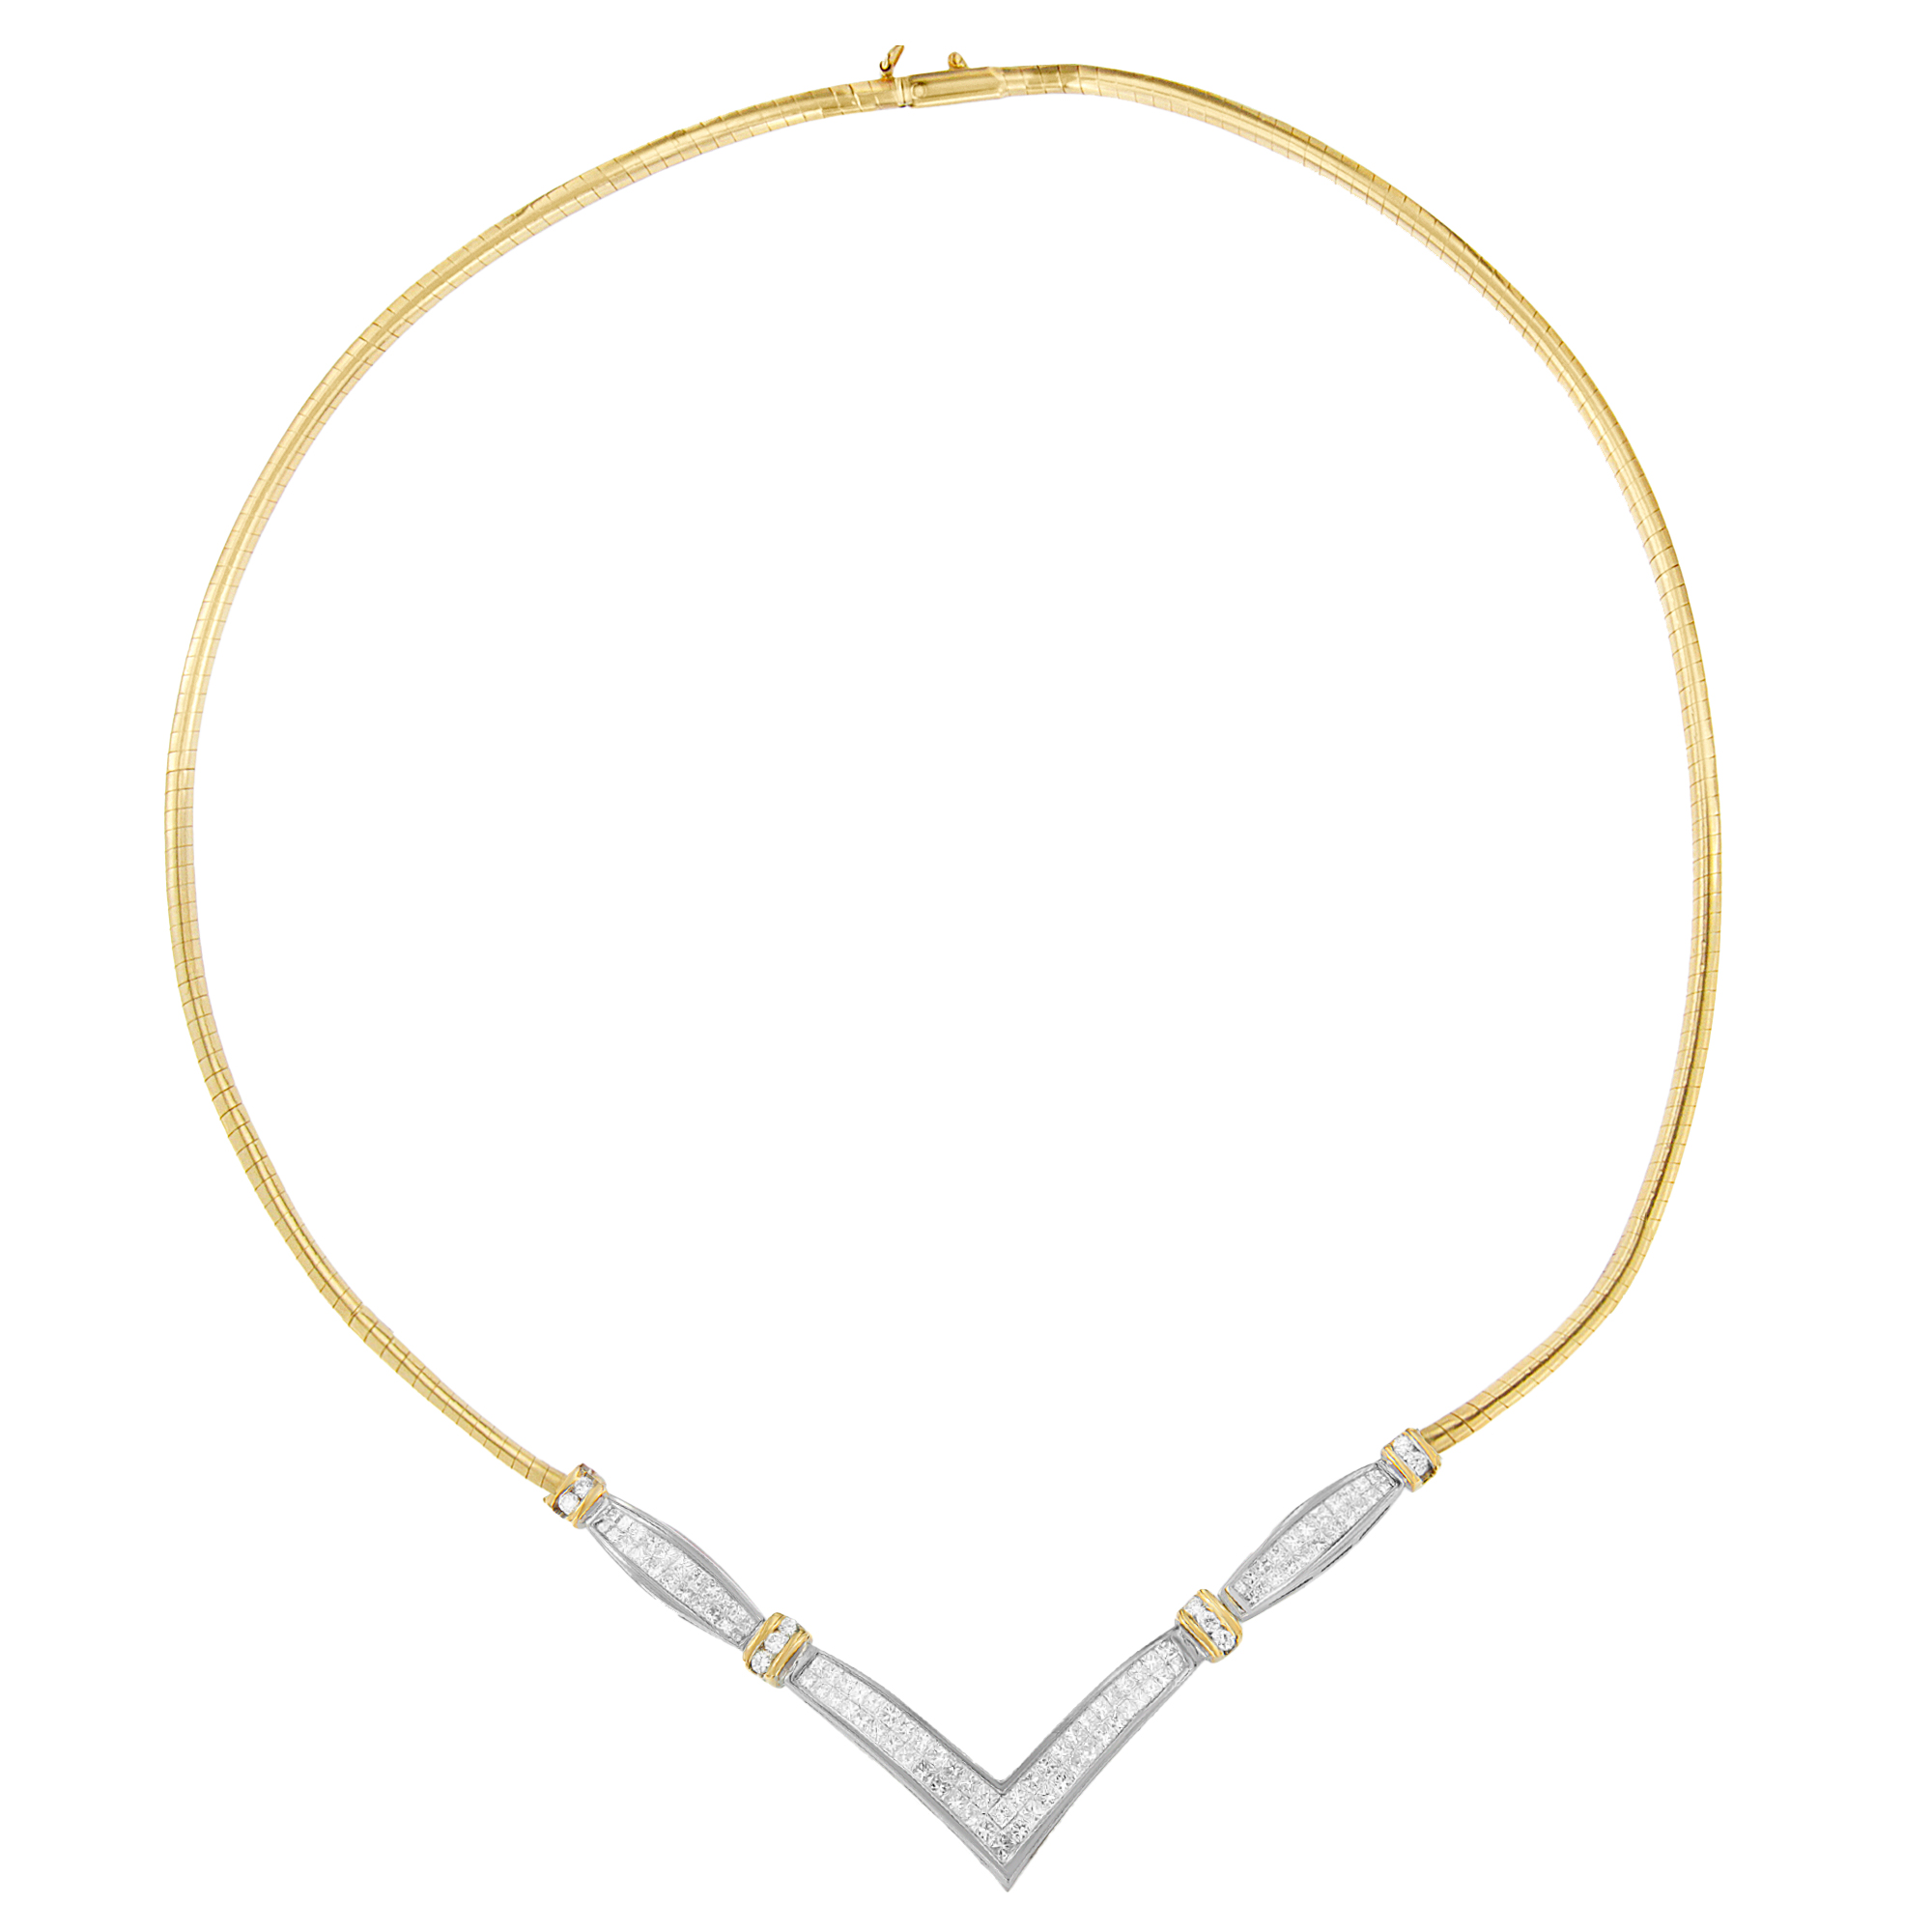 Haus of Brilliance 14K Yellow and White Gold 2.00 Cttw Round and Princess-Cut Diamond 'V' Shape Statement Necklace (H-I Color, SI2-I1 Clarity)- 18"